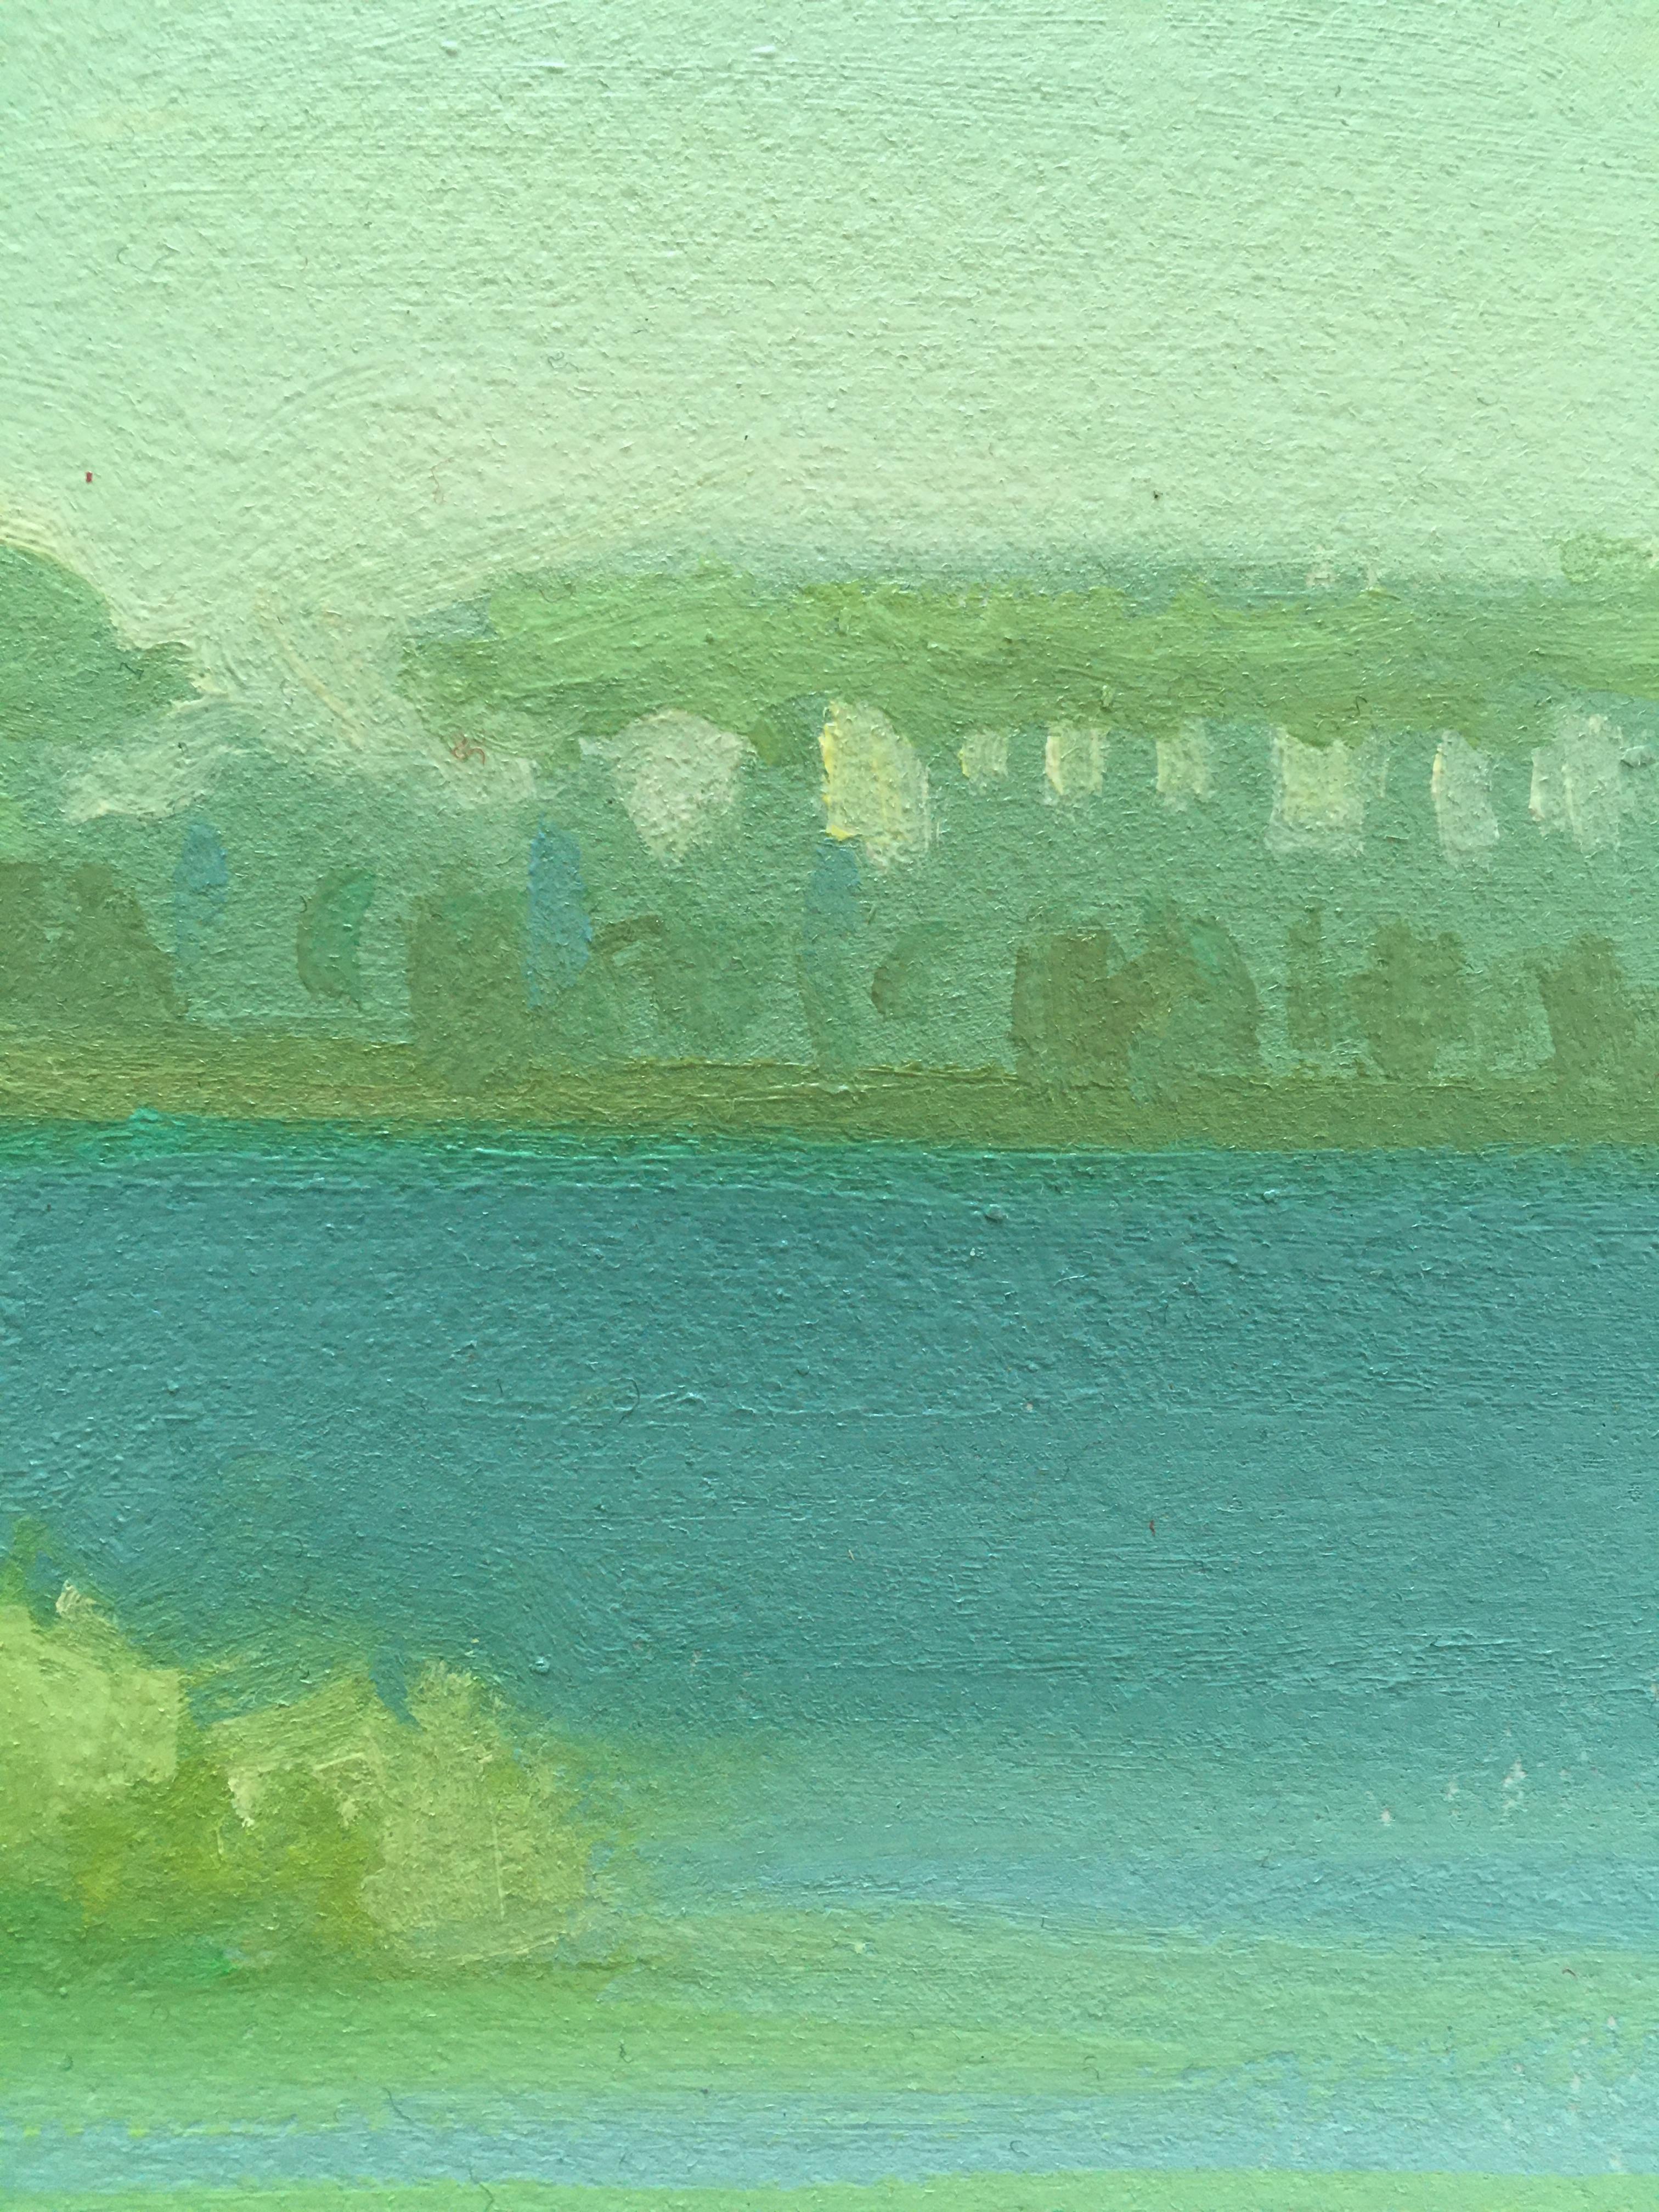 Seaside Landscape Painting  Phthalo Green w/ Trees & Ocean Bay  Oil on Arches 2